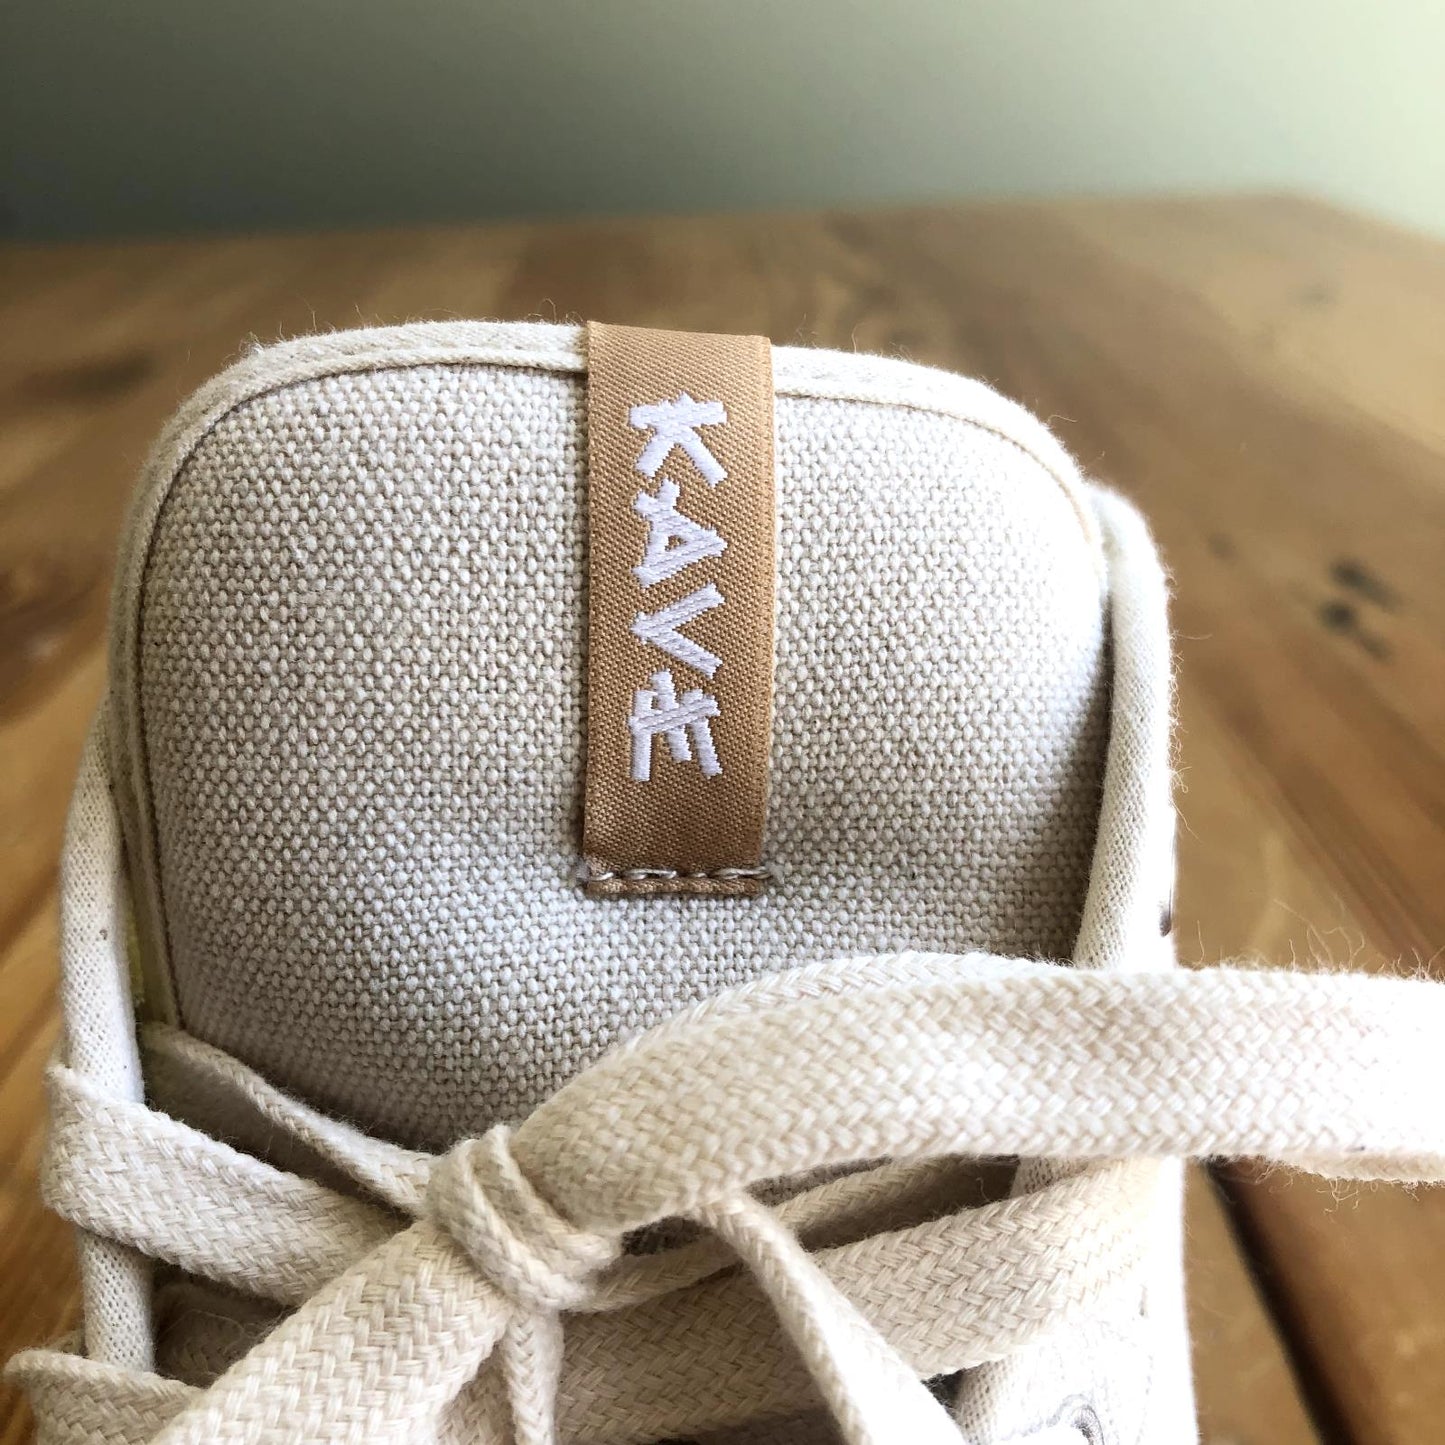 41 / KAVE Footwear Natural Canvas High Top Shoes $130 NEW w/ Box 1106AR